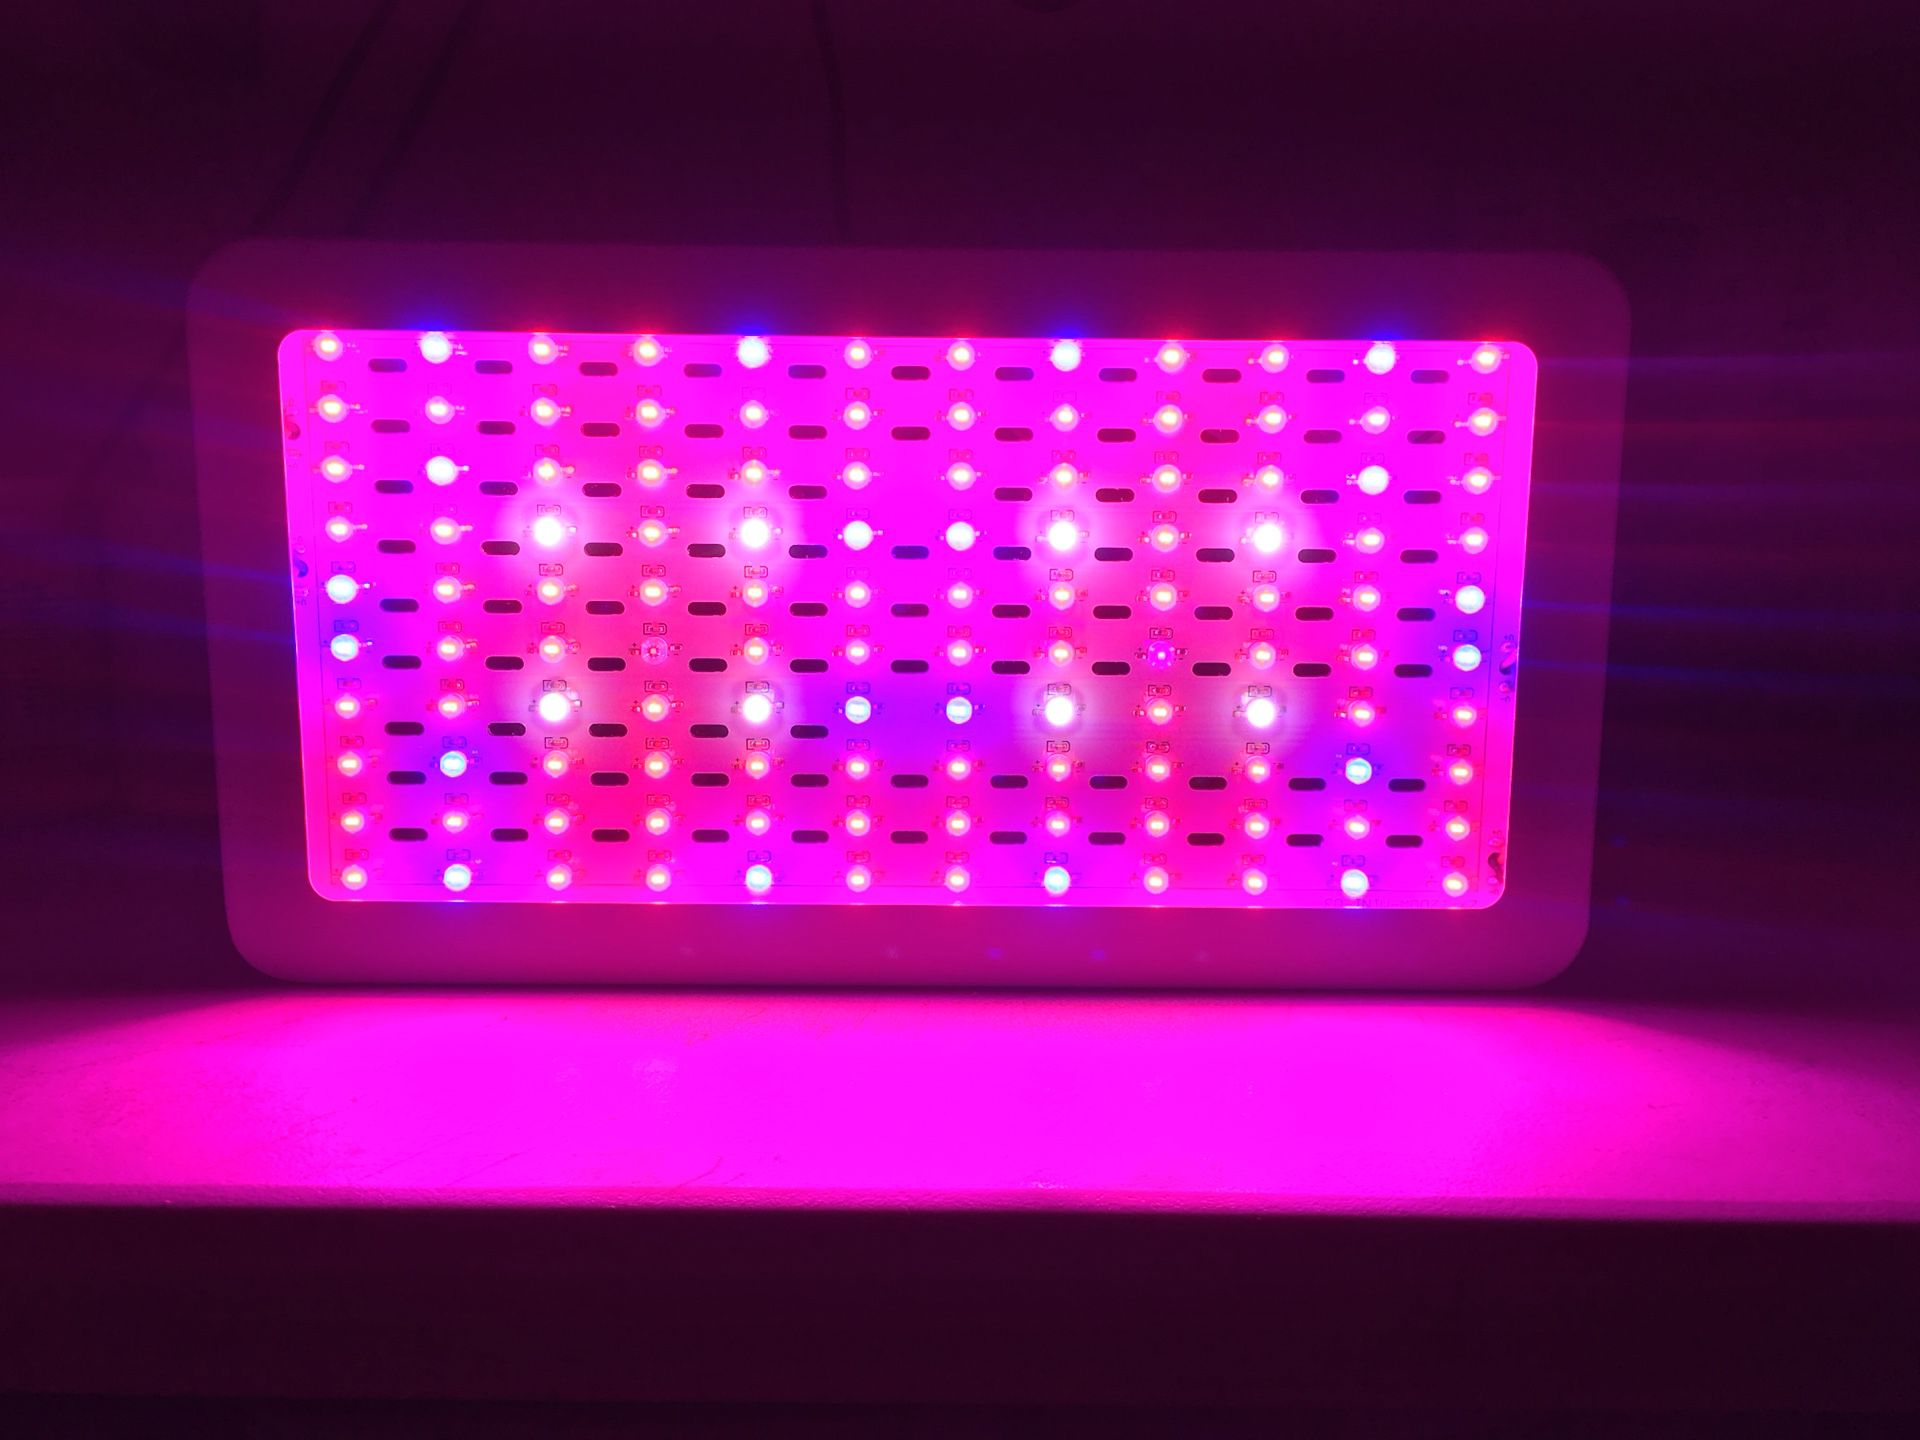 1200w full spec led Grow light brand new. Includes adjustable light hanger. Other Grow equipment available: lec, cmh, tents, fans, carbon filters